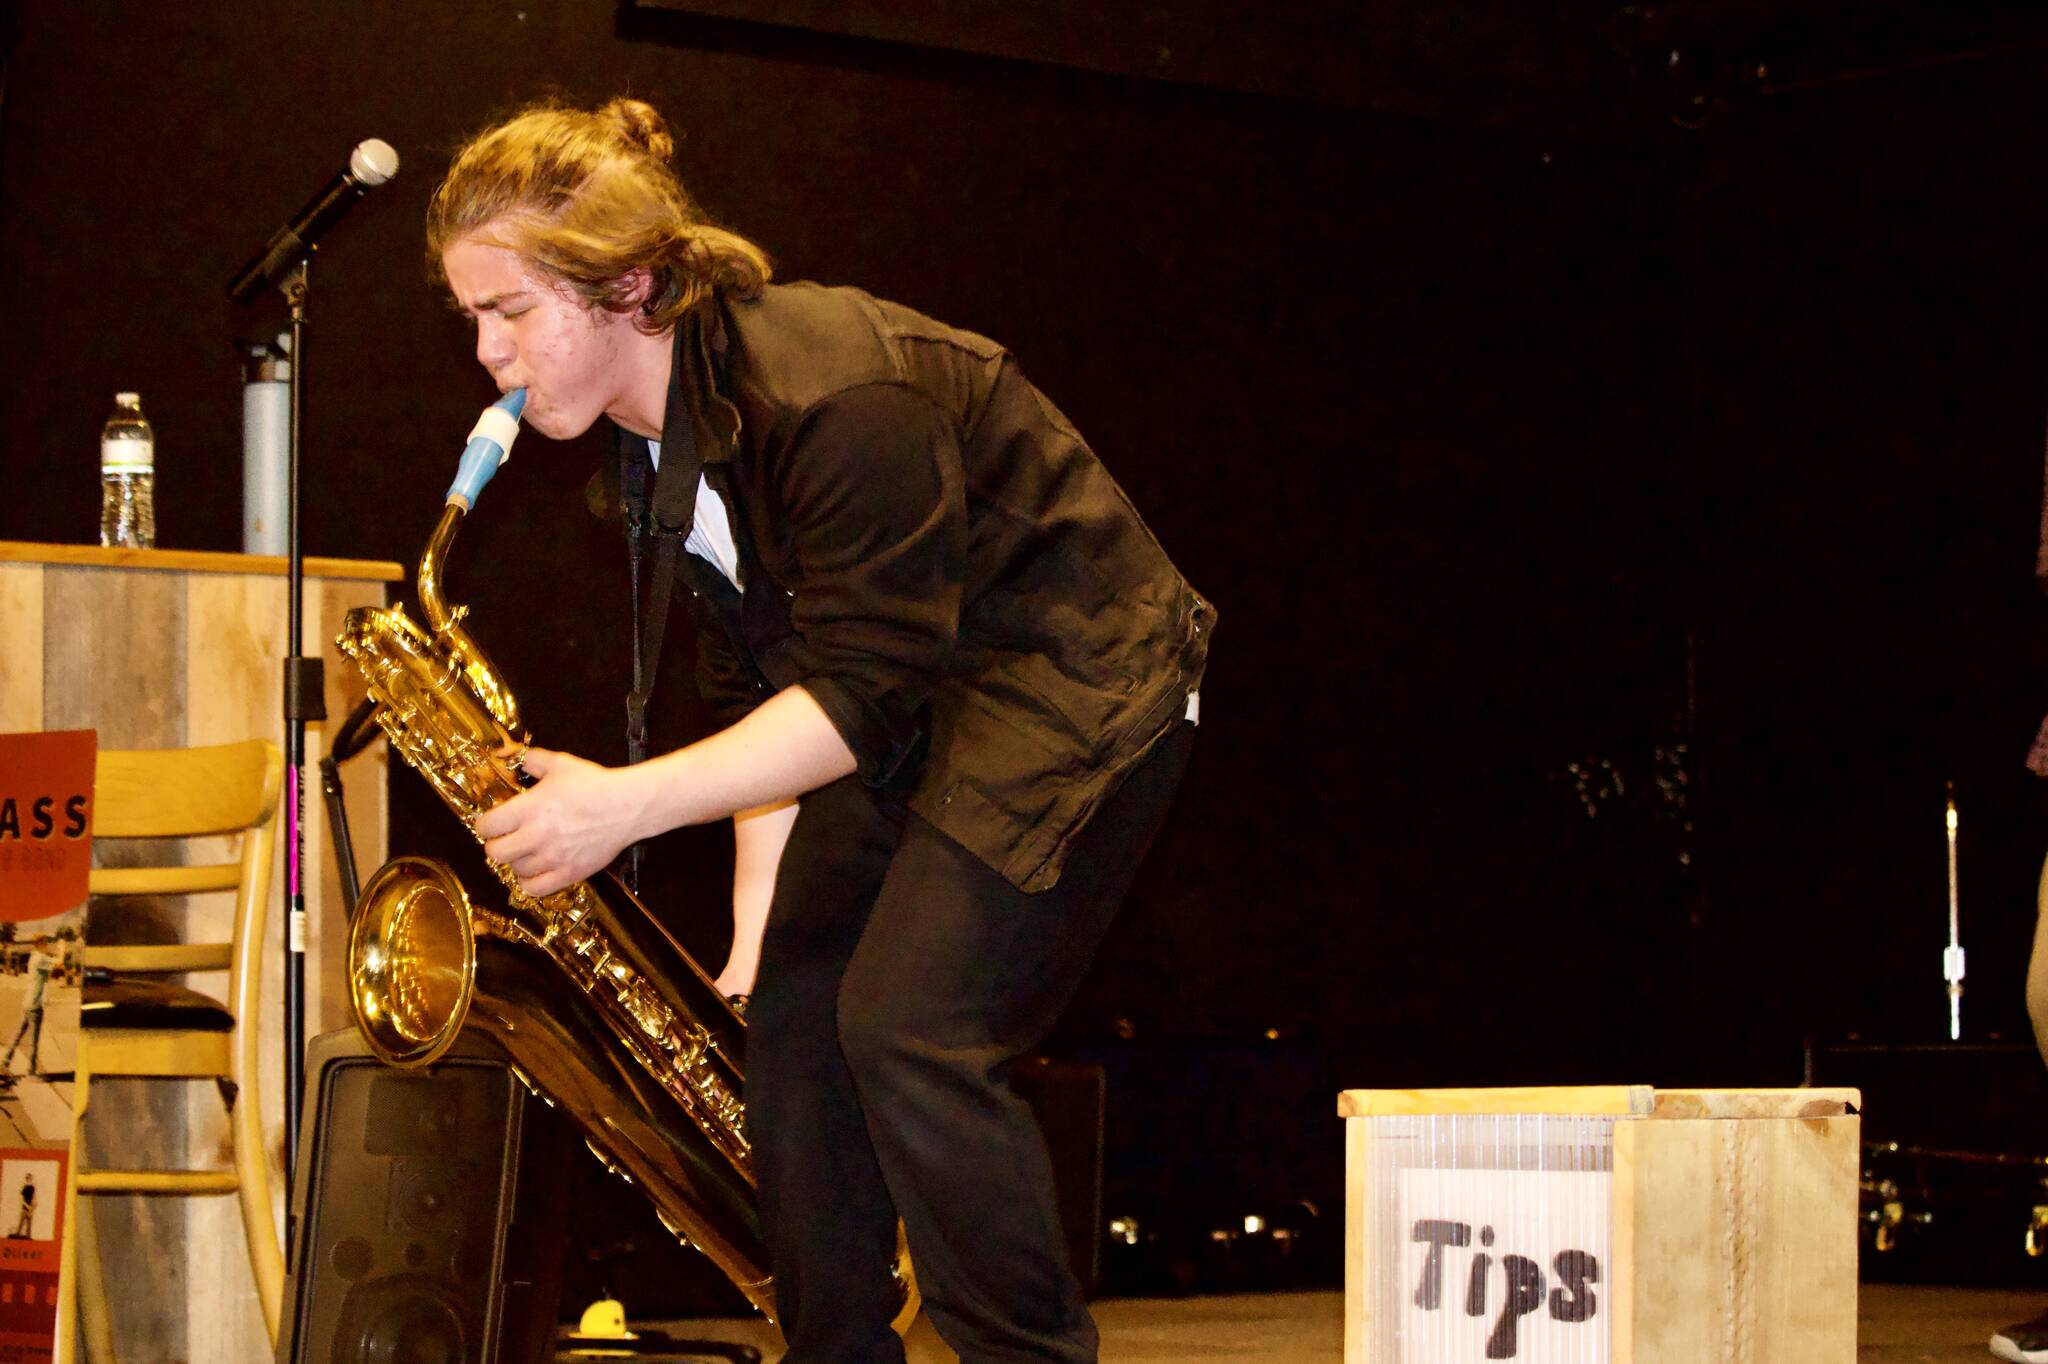 Photo by Rachel Rosen/Whidbey News-Times
Ethan Tang plays the baritone saxophone.